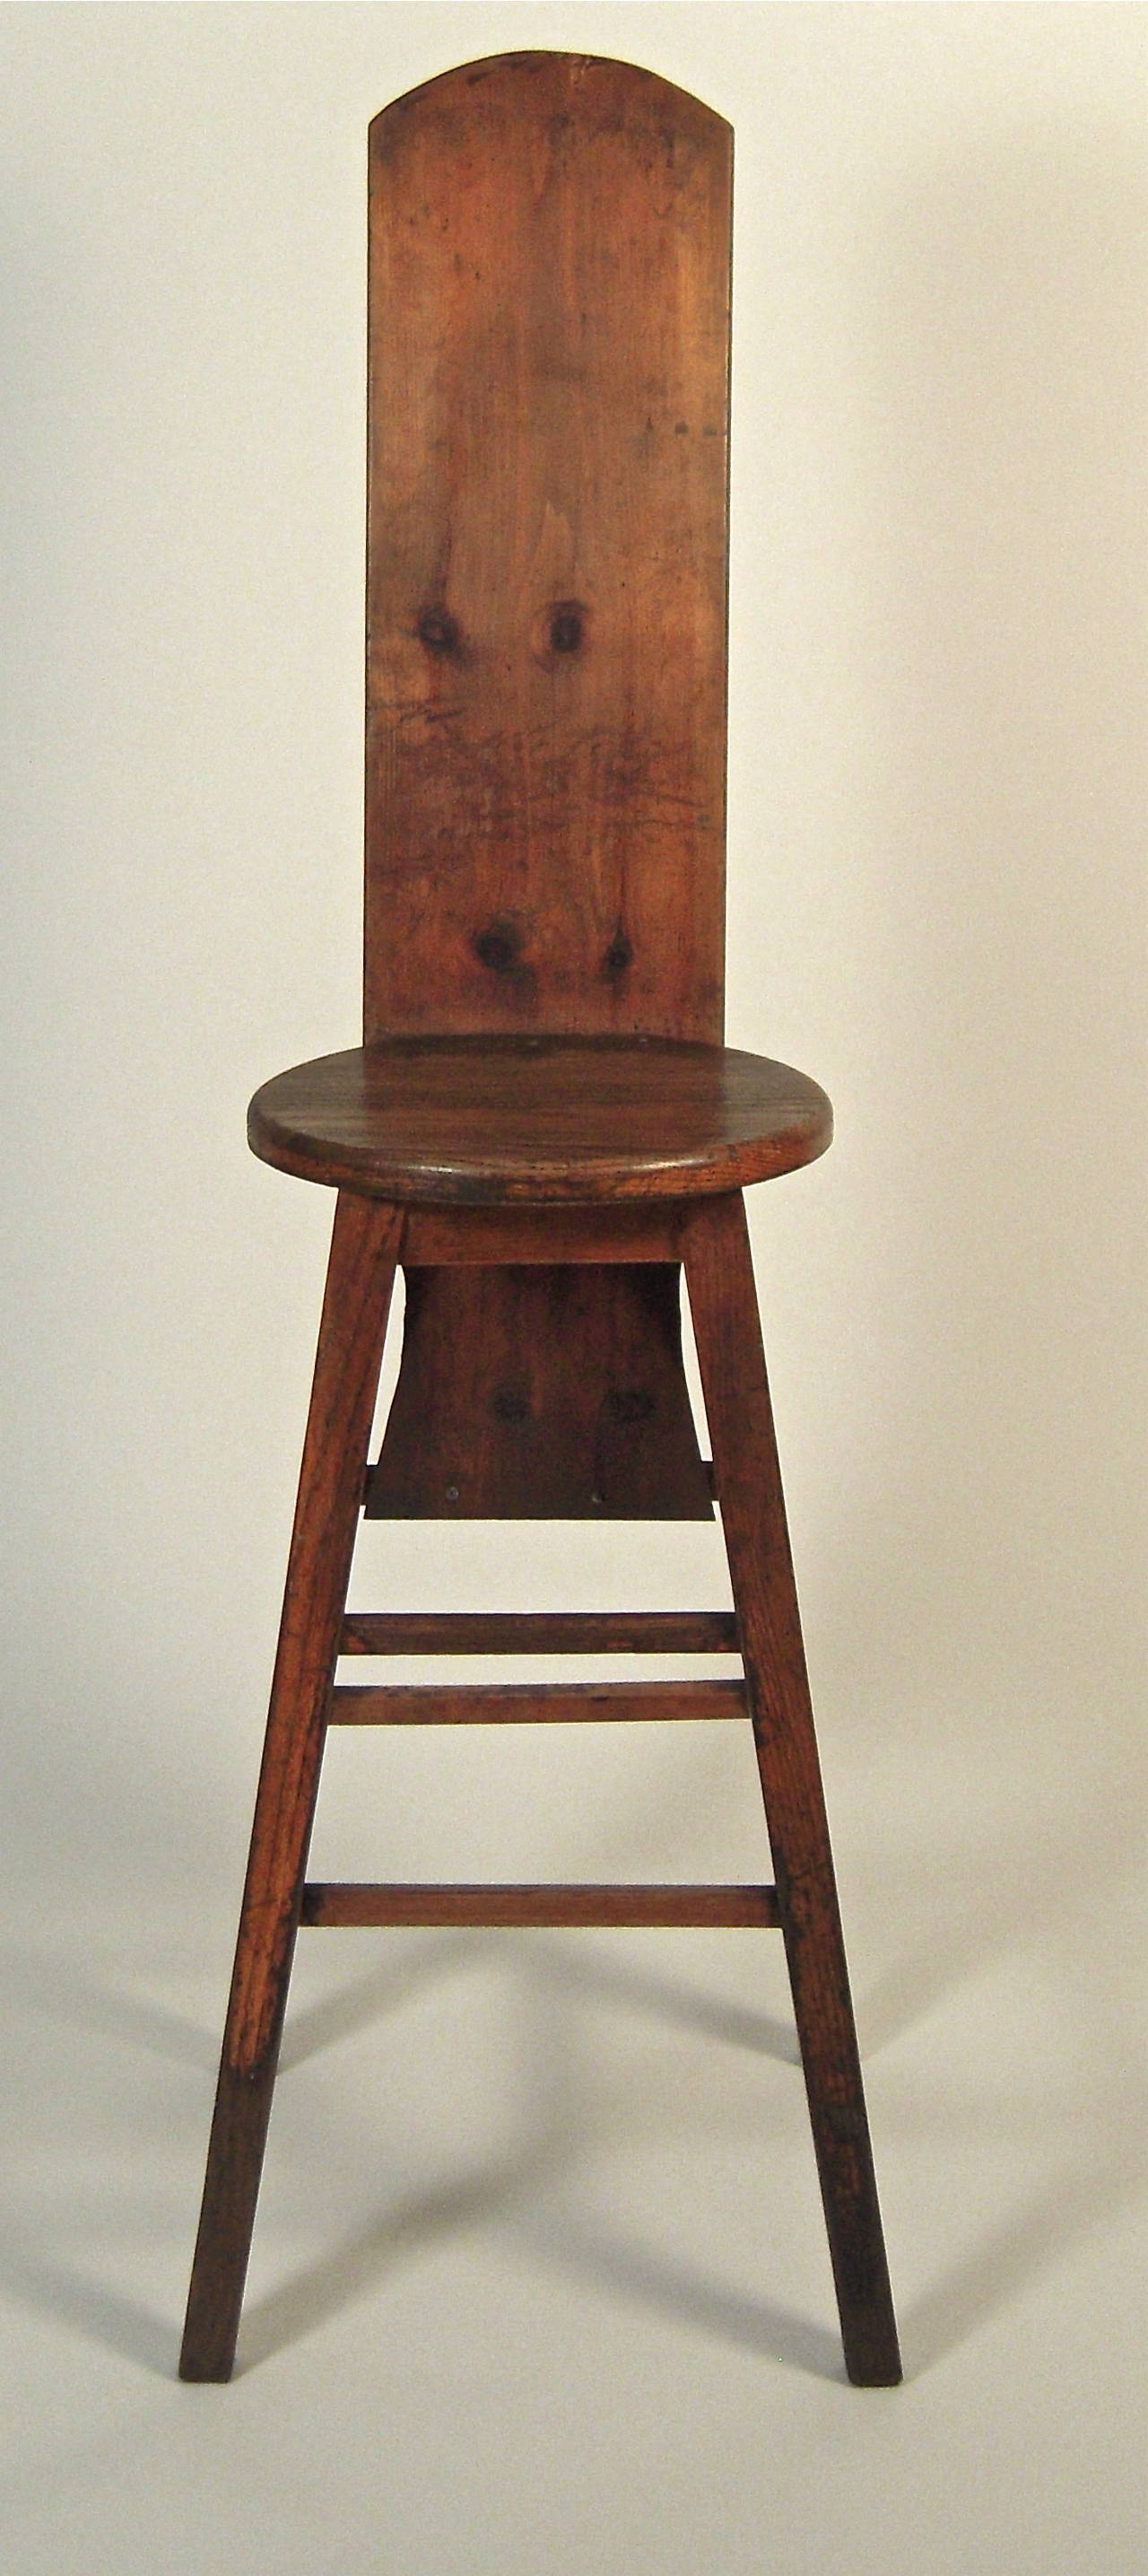 A sculptural and completely useable, tall back high stool, in walnut stained oak and pine, designed and made as a child's punishment stool, the round seat, square section legs and foot rests in oak, the tall, angled back with arched top in pine. The